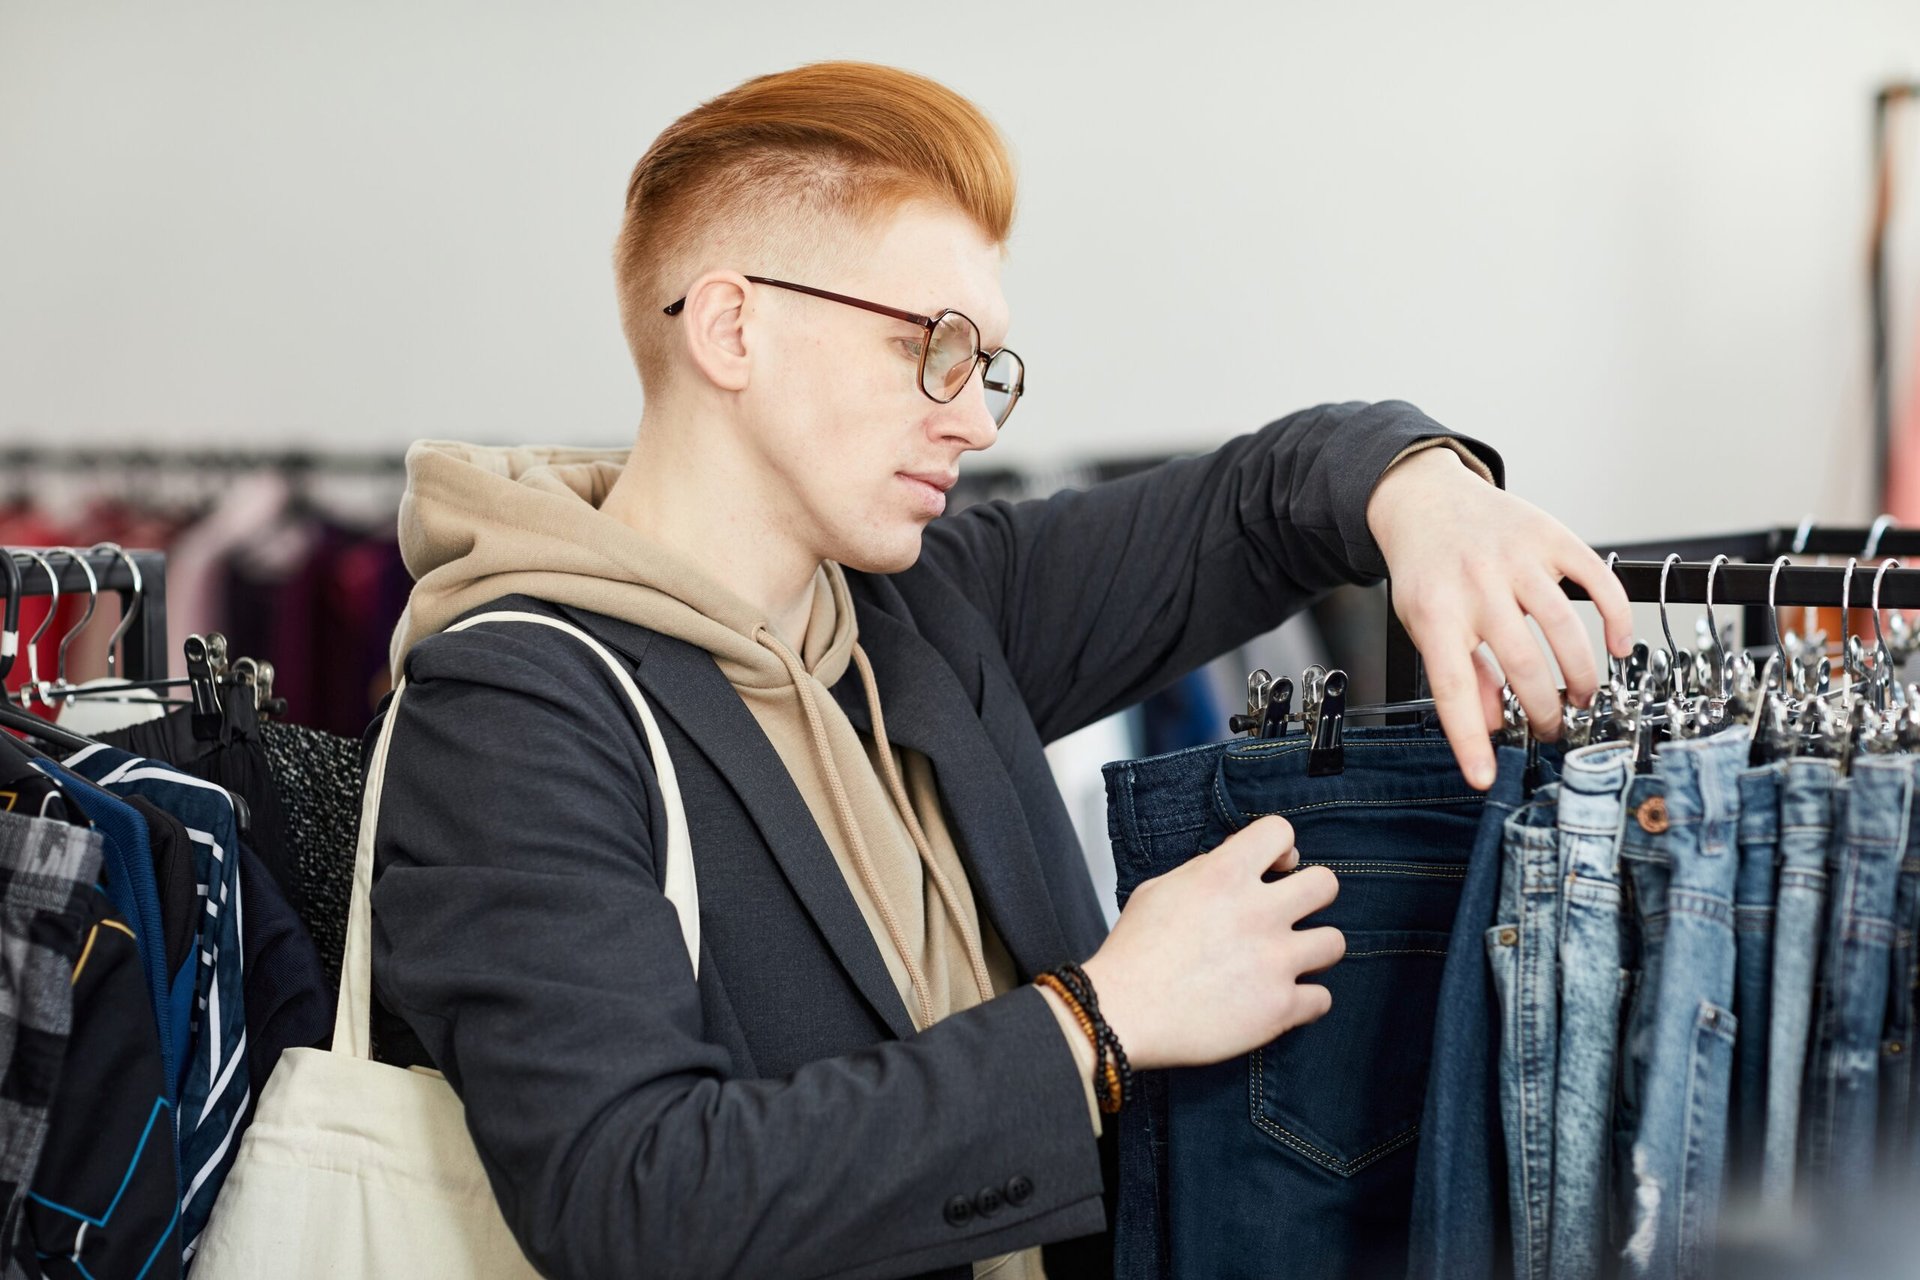 More consider resale value when buying jeans, handbags